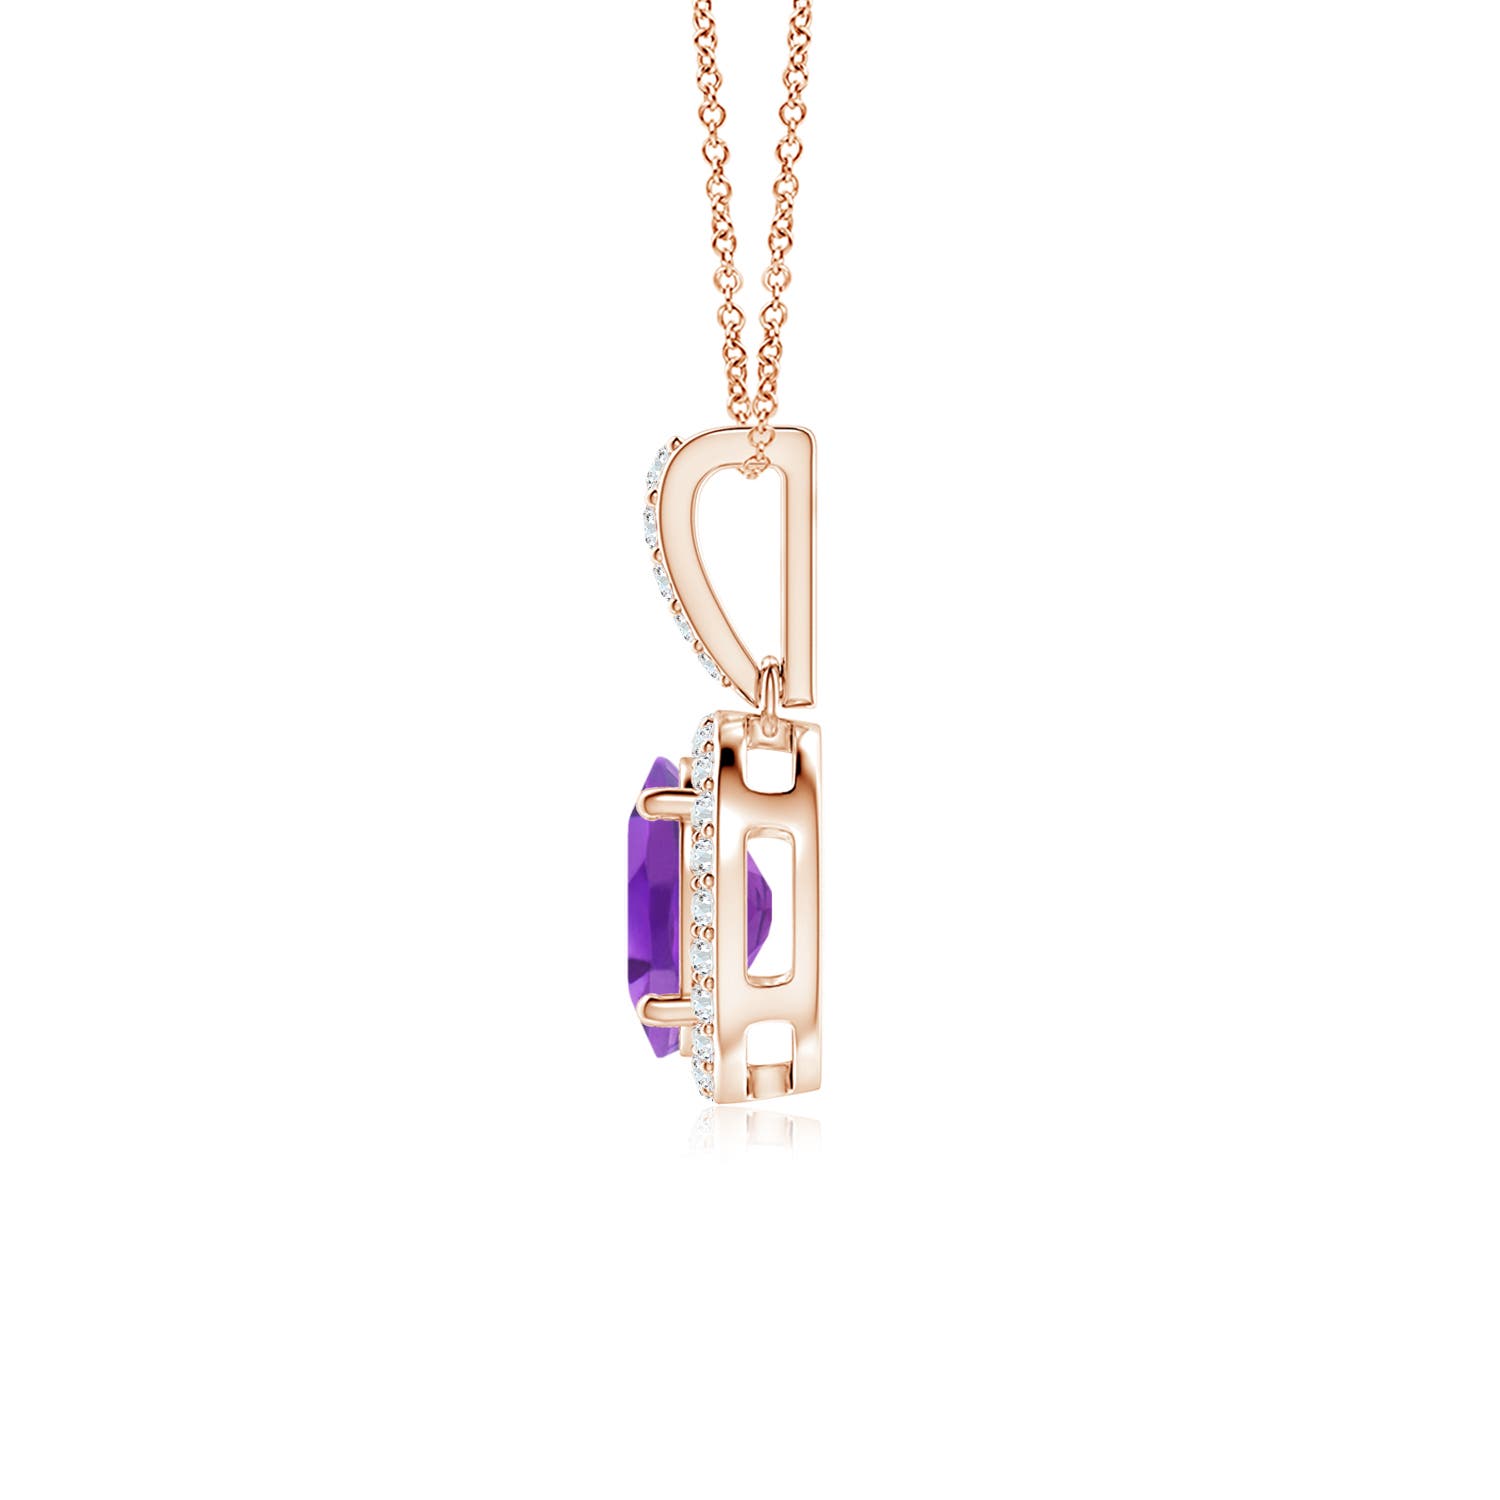 AA - Amethyst / 1.34 CT / 14 KT Rose Gold